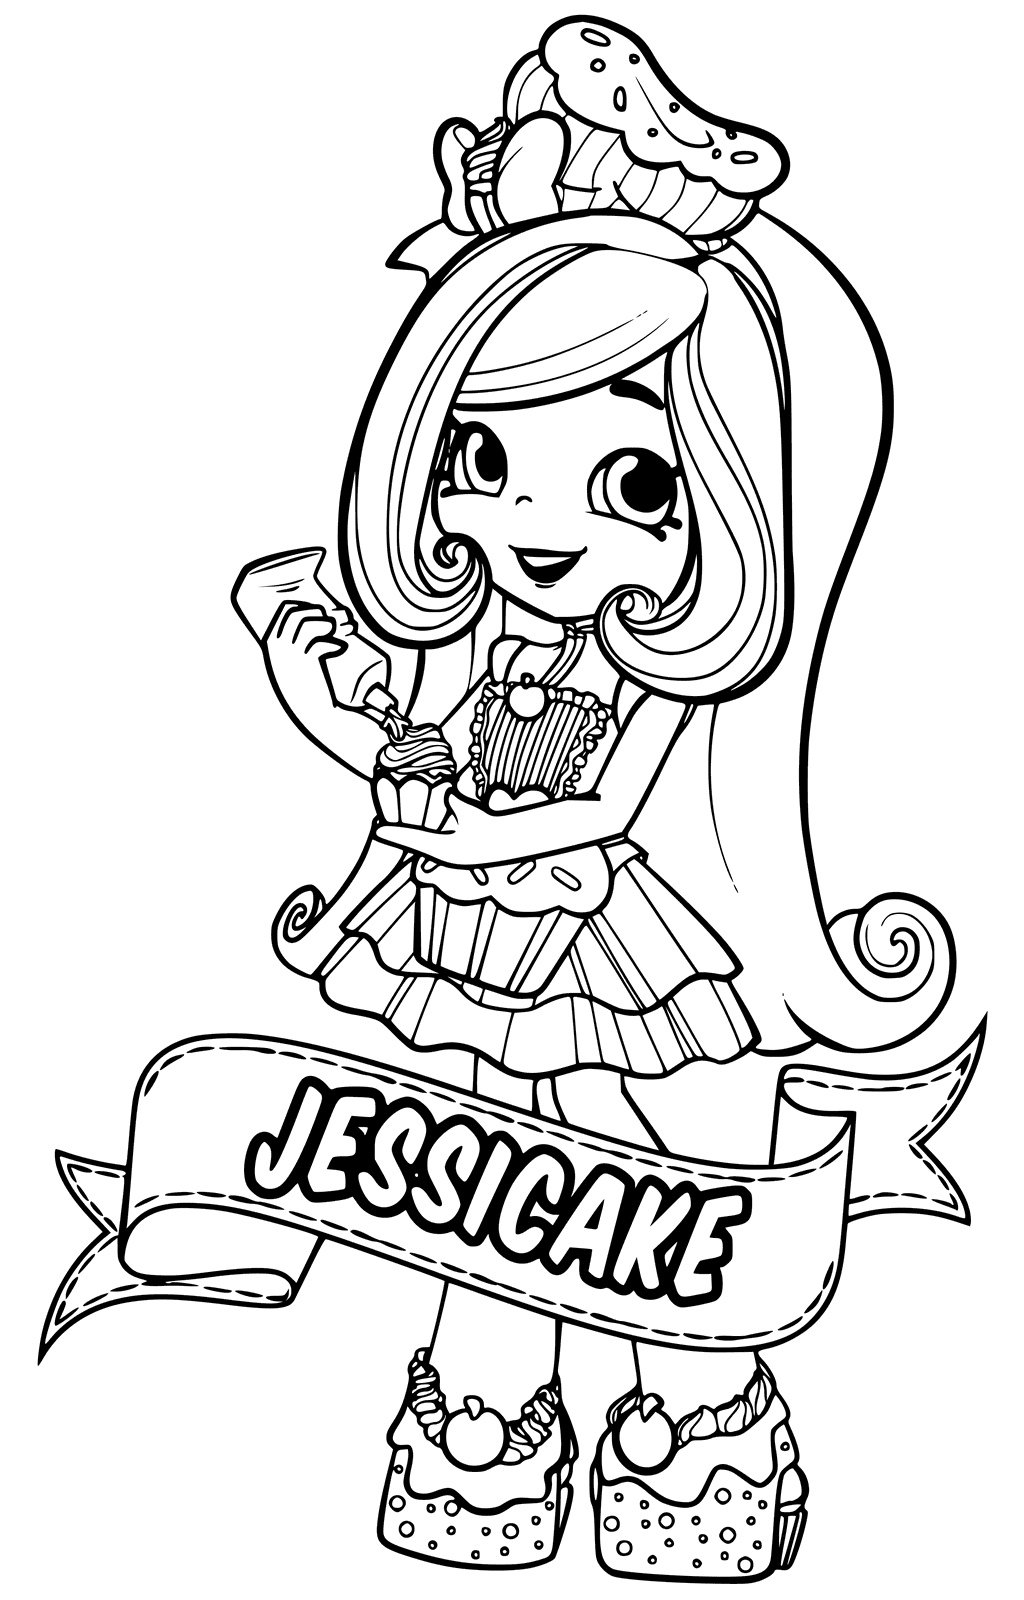 Shopkins Season 6 Coloring Pages | Free download on ClipArtMag